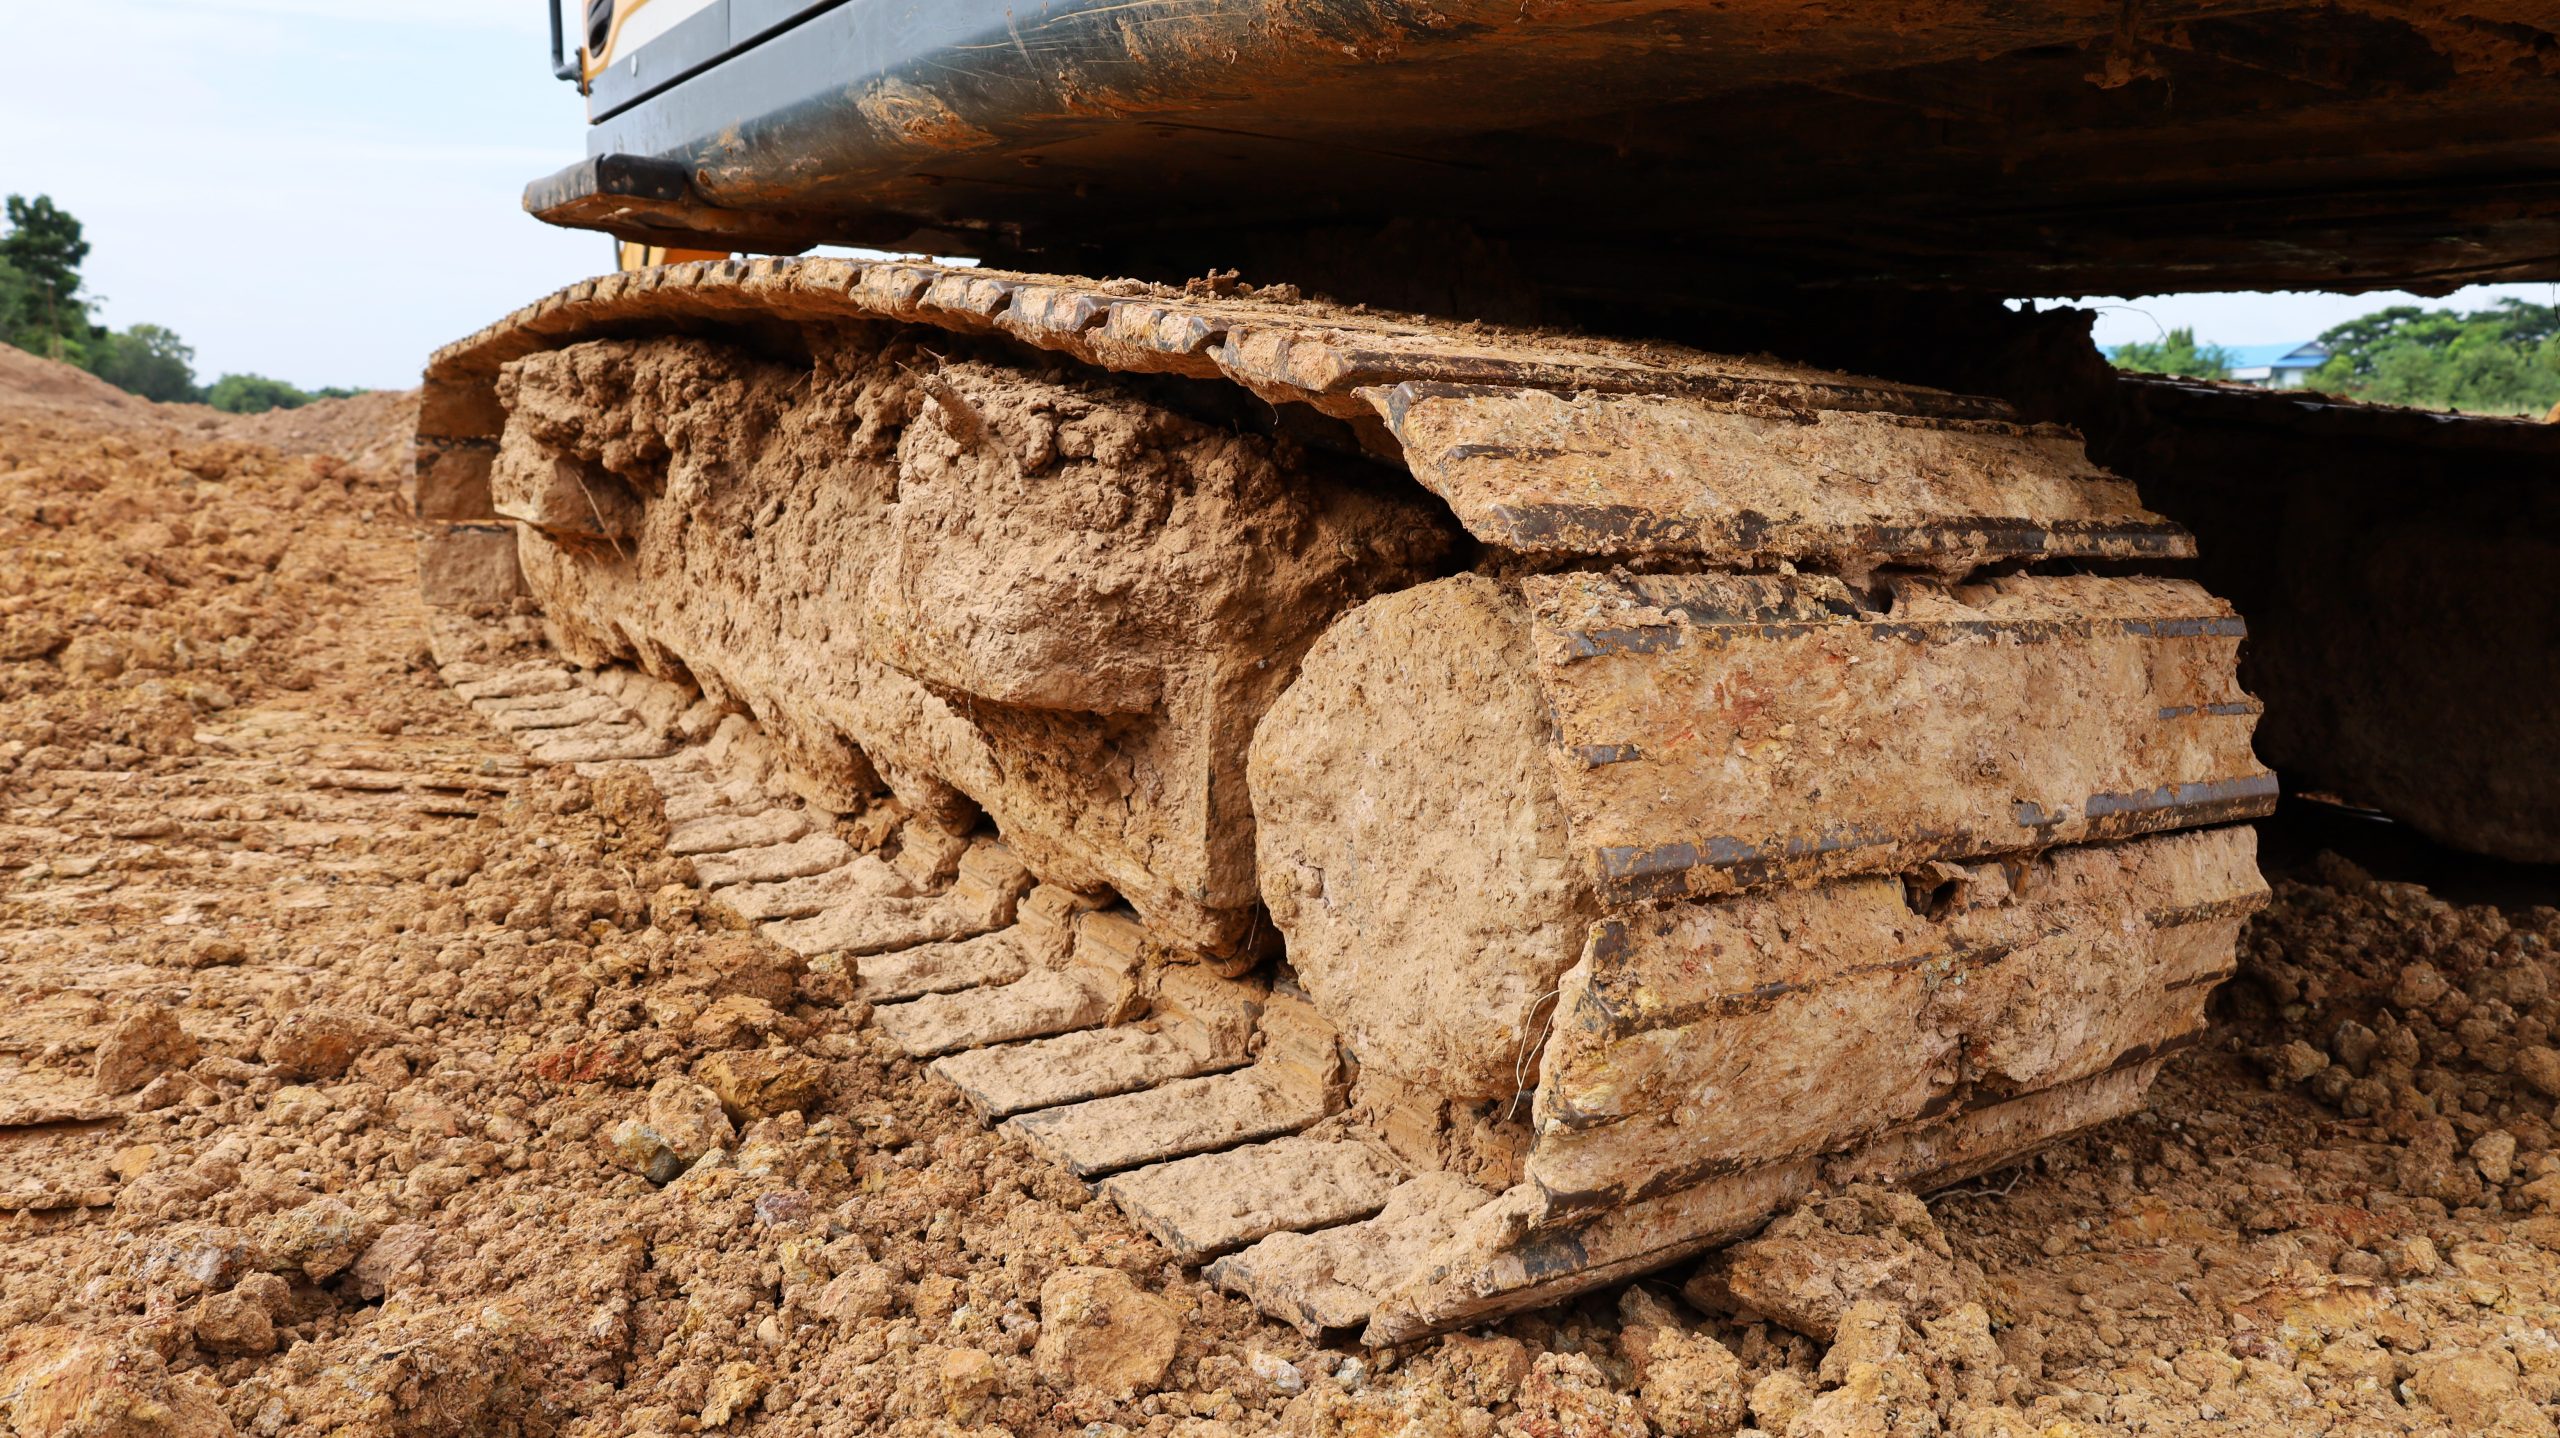 Dirty crawler backhoe. A crawler drive chassis of a heavy backho